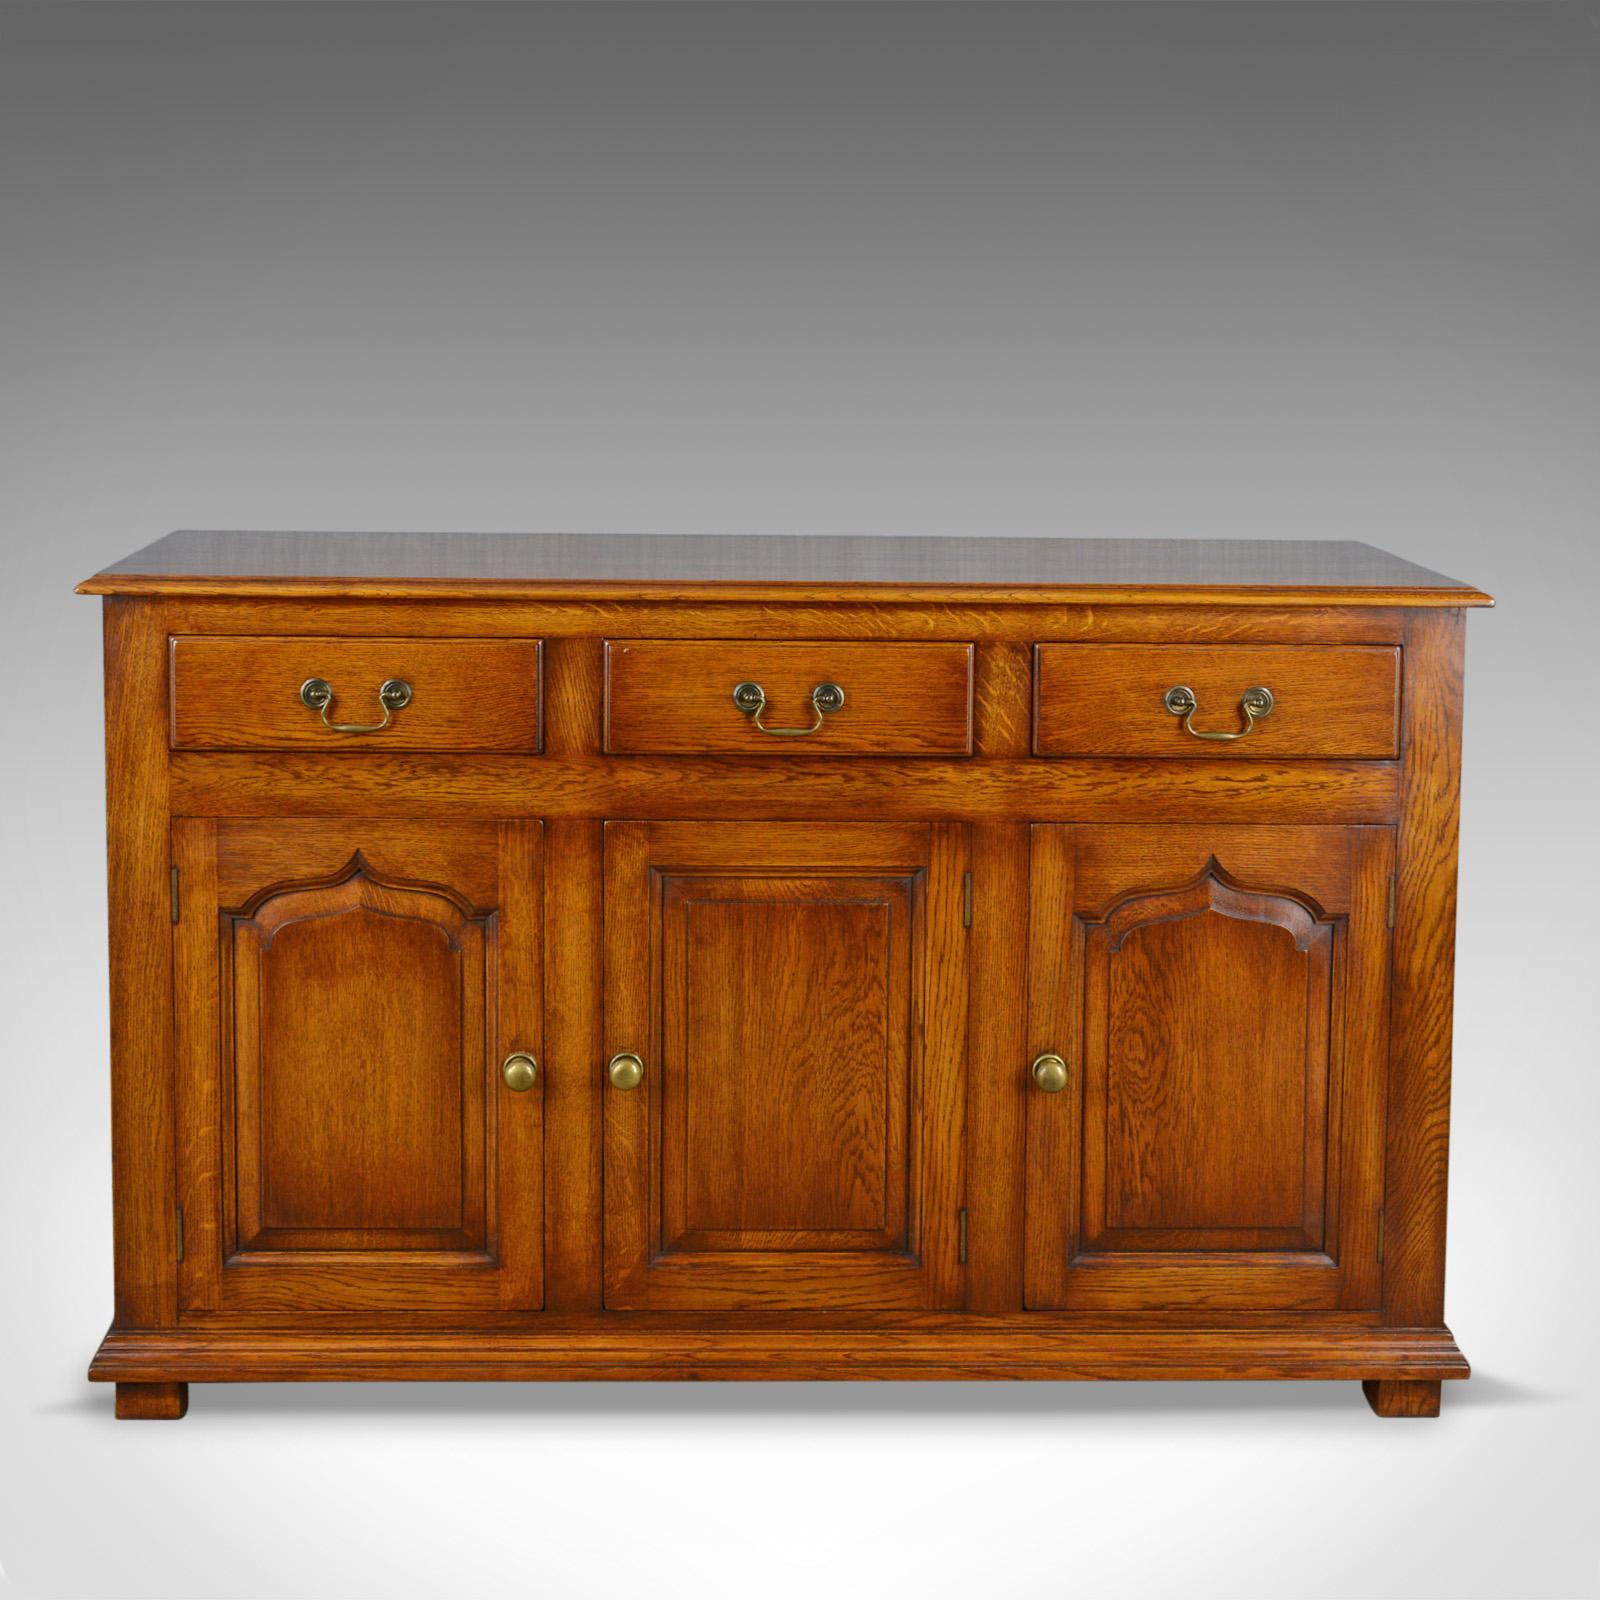 This is a Georgian revival oak sideboard, an English dresser base dating to the late 20th century.

Of quality craftsmanship
In select cuts of solid English oak
Handmade and beautifully finished

Well executed classic Georgian revival
A suite